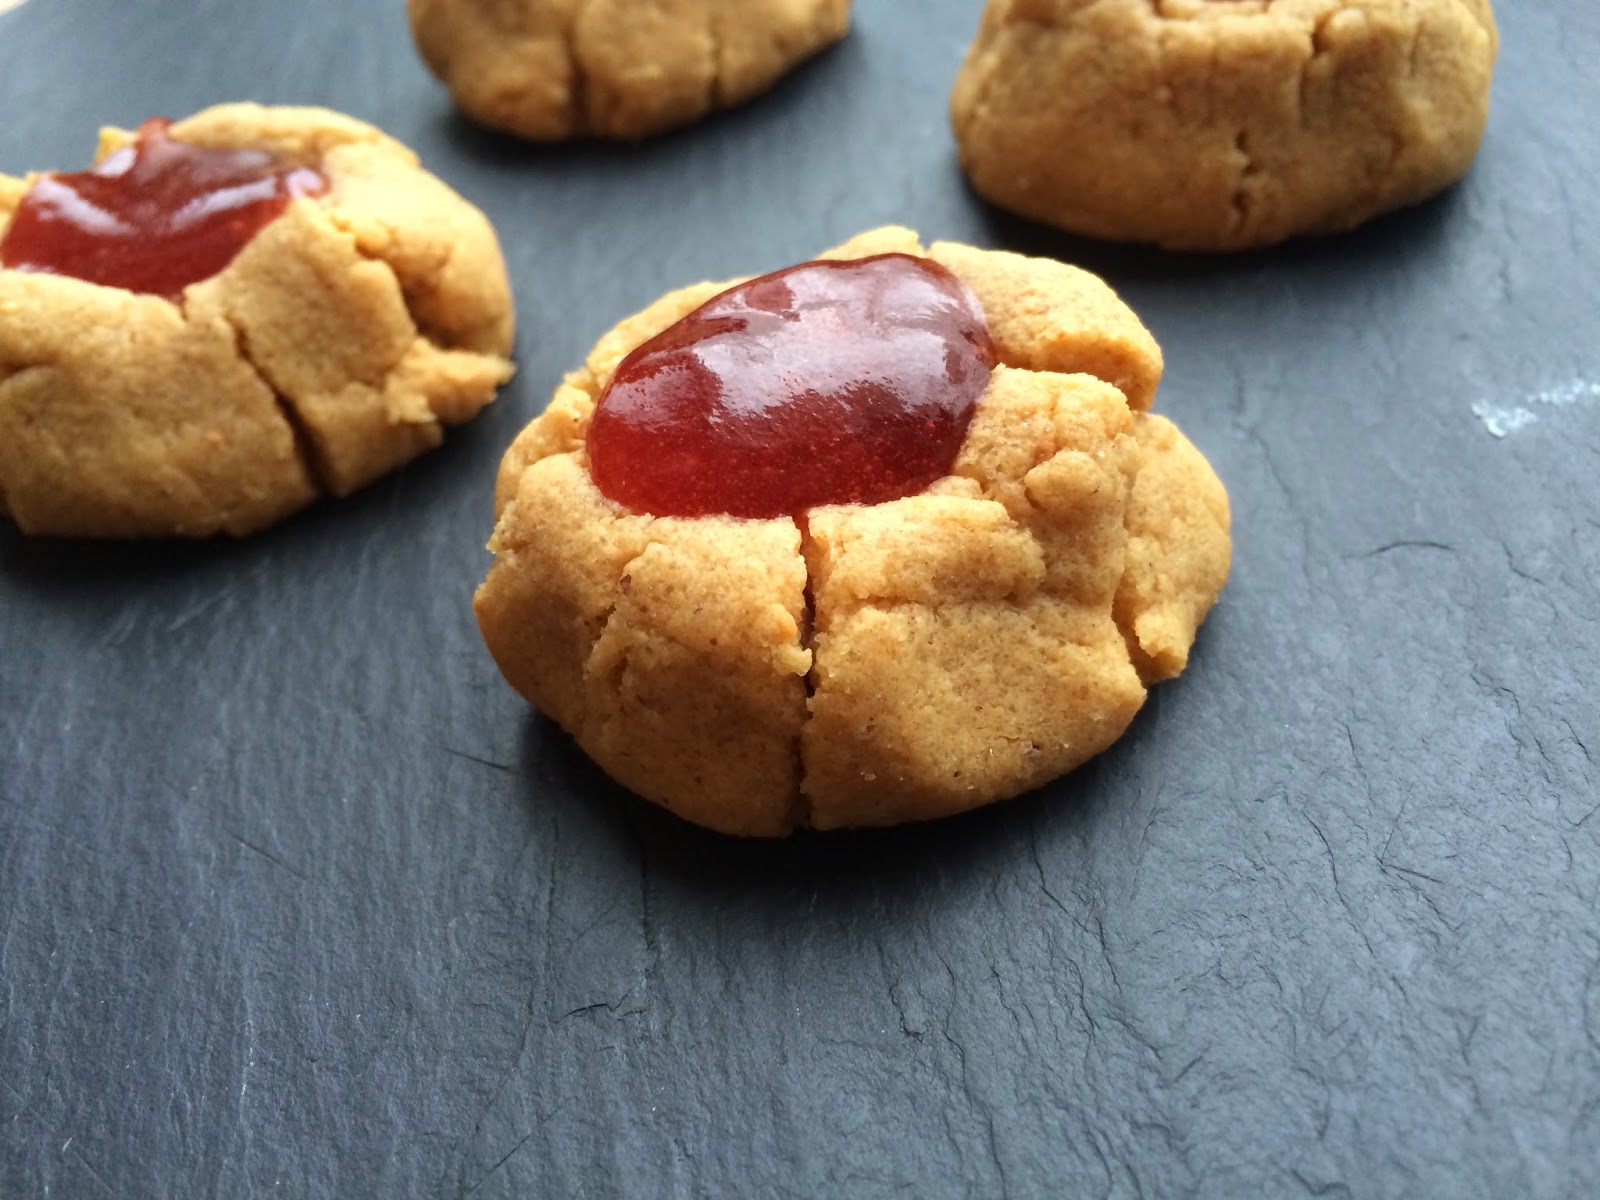 Gluten Free Peanut Butter and Jelly Cookies (2 ways)